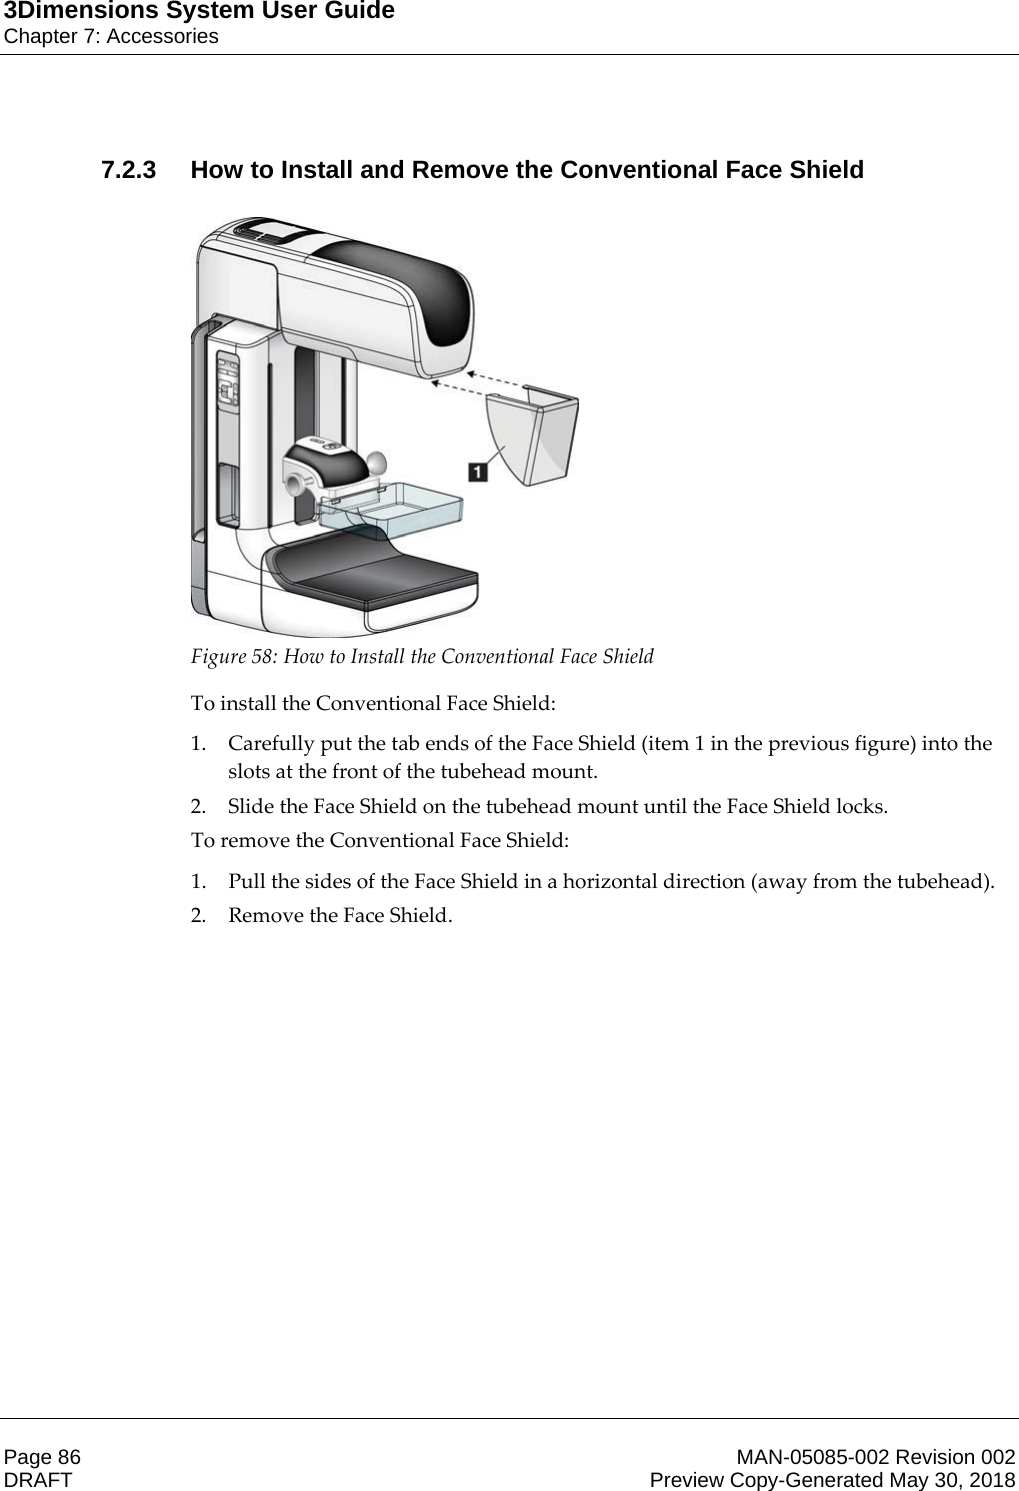 3Dimensions System User GuideChapter 7: AccessoriesPage 86 MAN-05085-002 Revision 002  DRAFT Preview Copy-Generated May 30, 20187.2.3 How to Install and Remove the Conventional Face Shield  Figure 58: How to Install the Conventional Face Shield To install the Conventional Face Shield: 1. Carefully put the tab ends of the Face Shield (item 1 in the previous figure) into the slots at the front of the tubehead mount. 2. Slide the Face Shield on the tubehead mount until the Face Shield locks. To remove the Conventional Face Shield:  1. Pull the sides of the Face Shield in a horizontal direction (away from the tubehead). 2. Remove the Face Shield. 